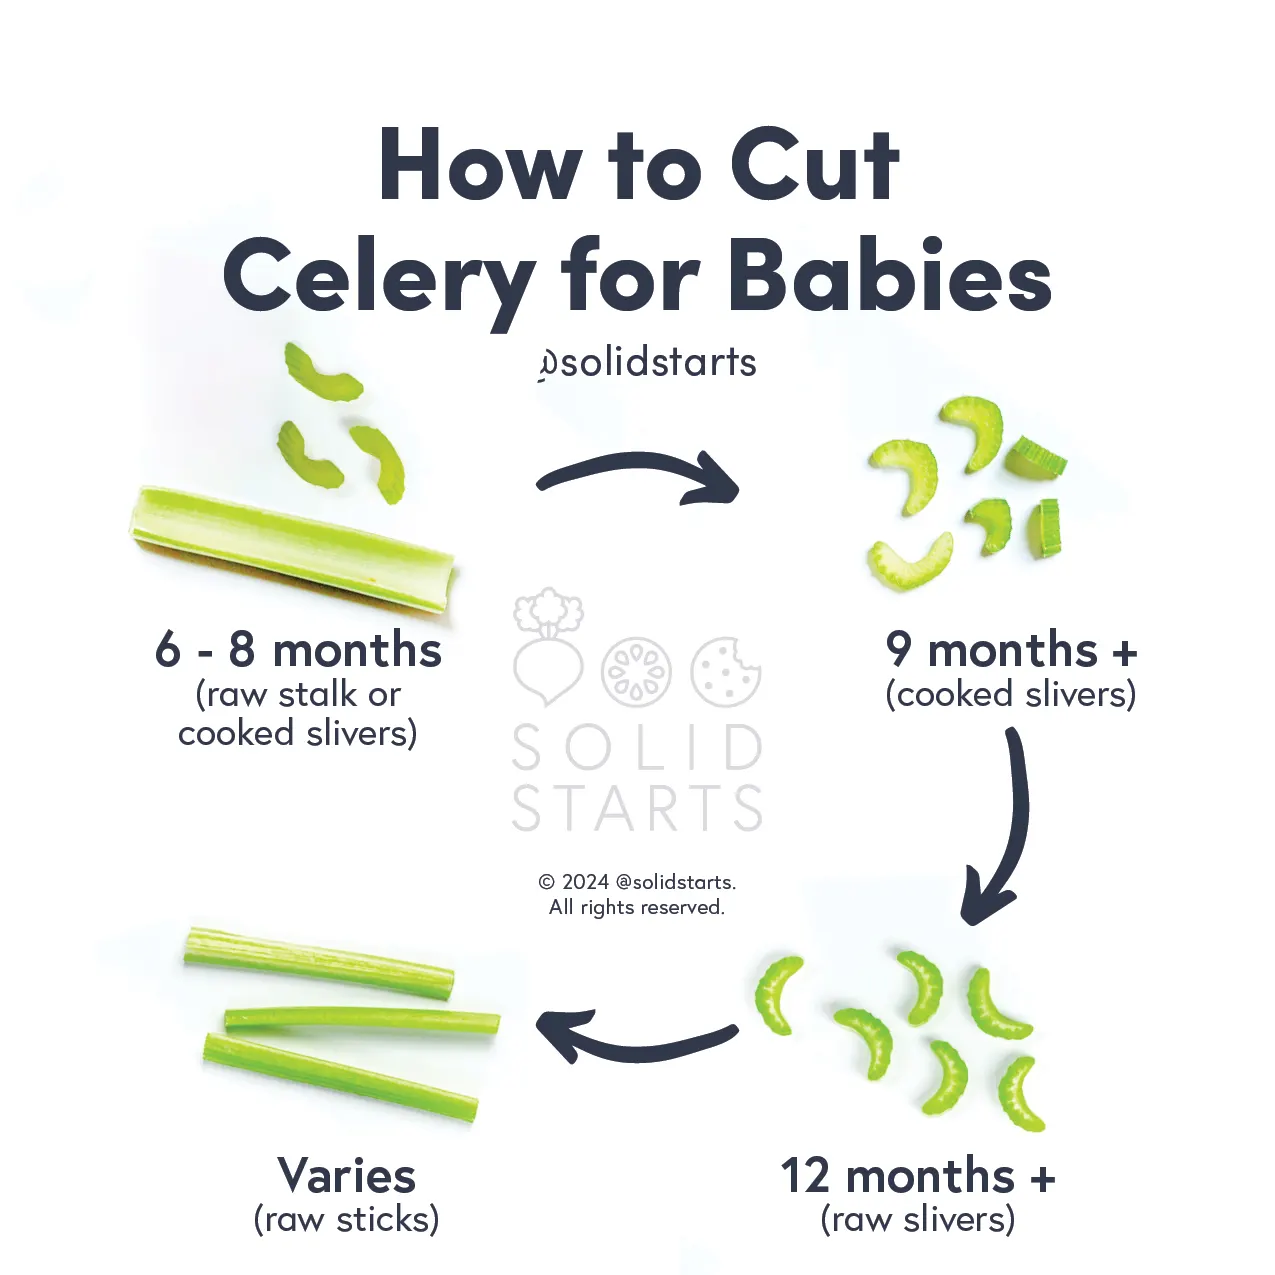 a Solid Starts infographic with the header How to Cut Celery for Babies: raw stalk or cooked slivers for 6-8 mos, cooked slivers for 9 mos+, raw slivers for 12 mos+, and age varies for raw sticks